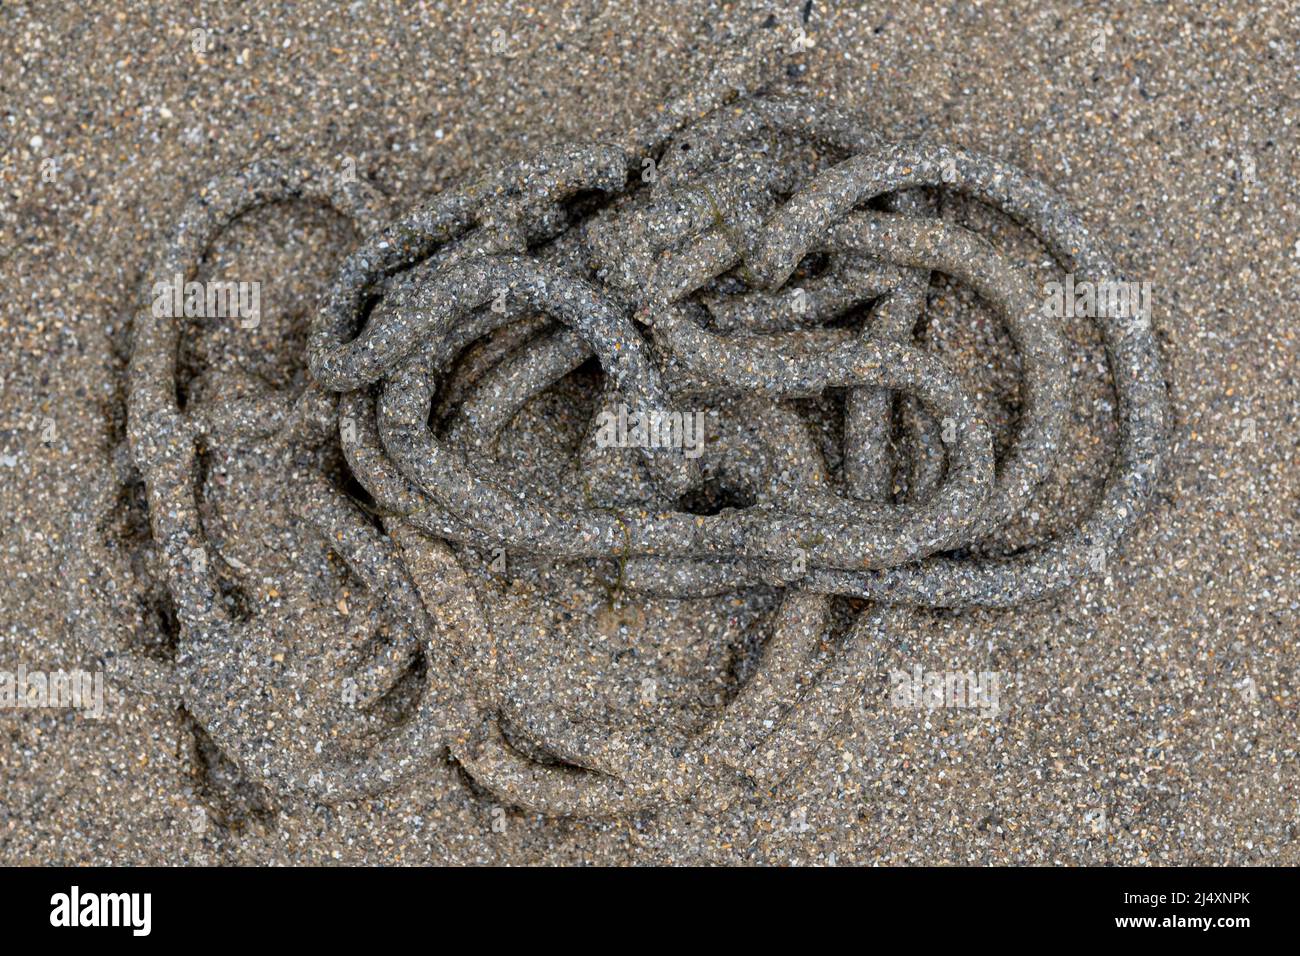 Sand in the shape of a worm expelled by the sand worm from the sea Stock Photo